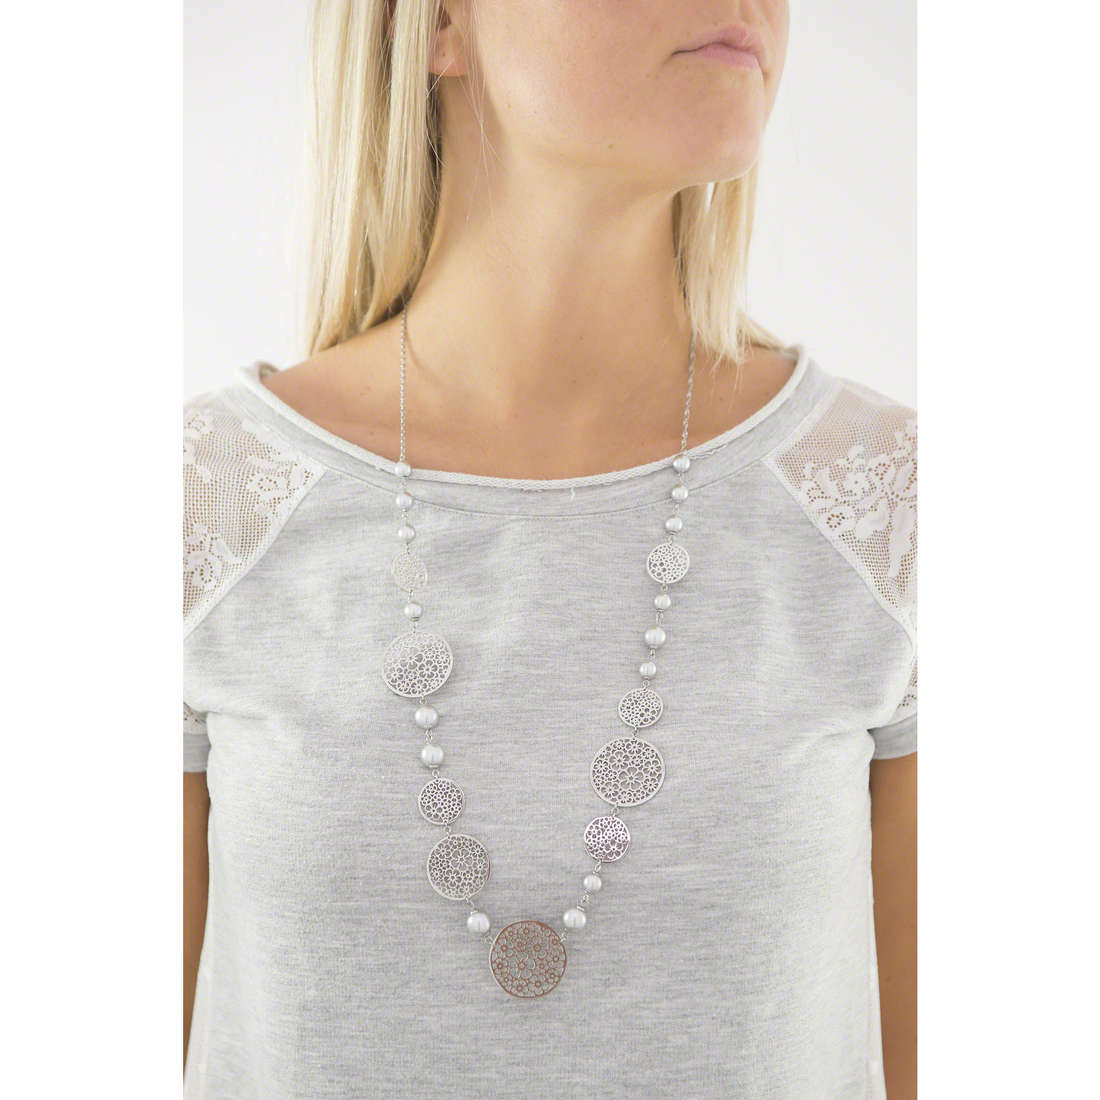 Brosway necklaces Mademoiselle woman BIS02 wearing